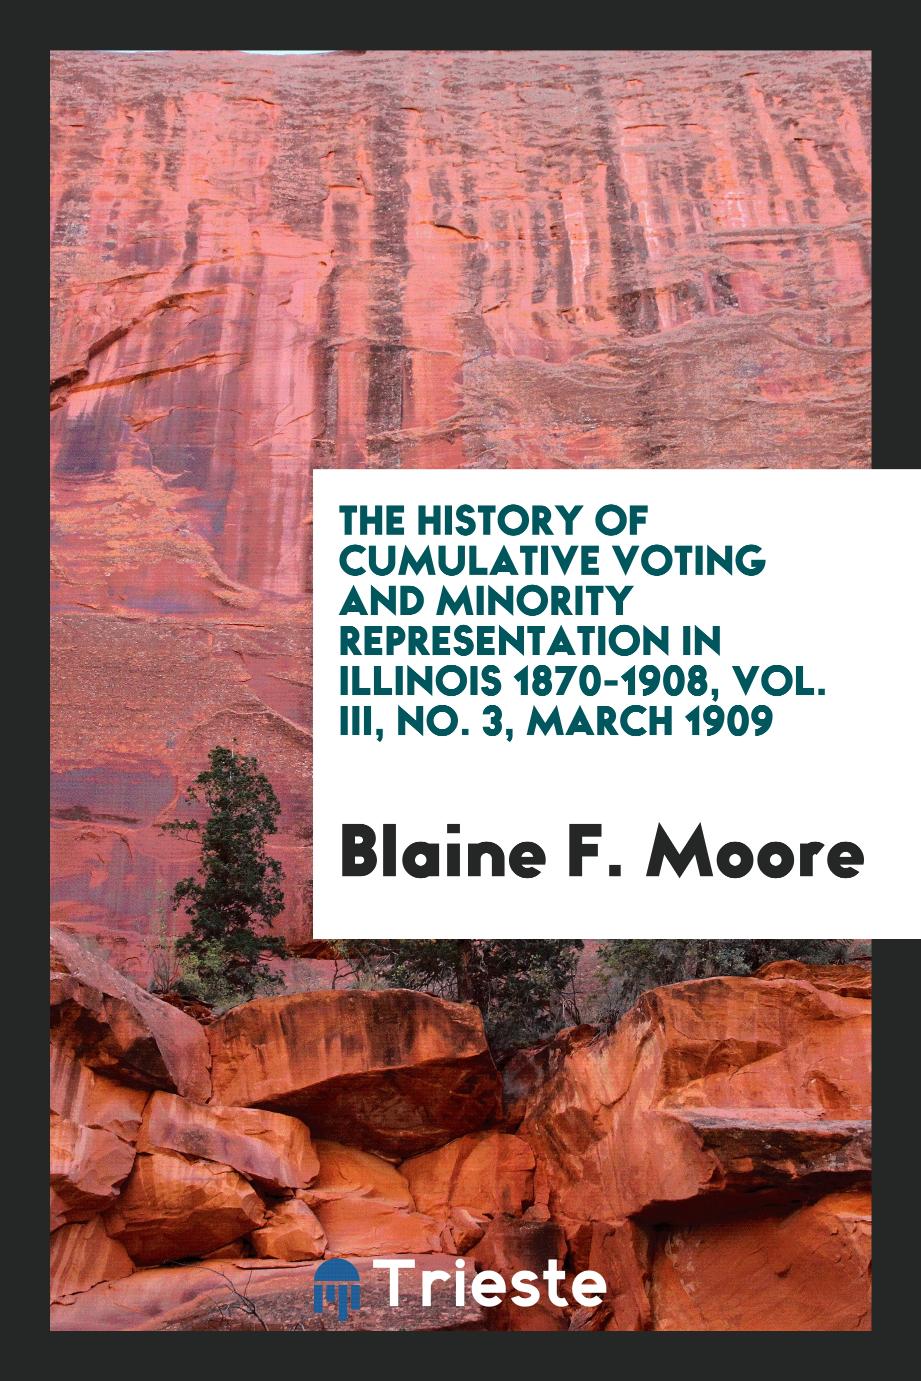 The history of cumulative voting and minority representation in Illinois 1870-1908, Vol. III, No. 3, March 1909